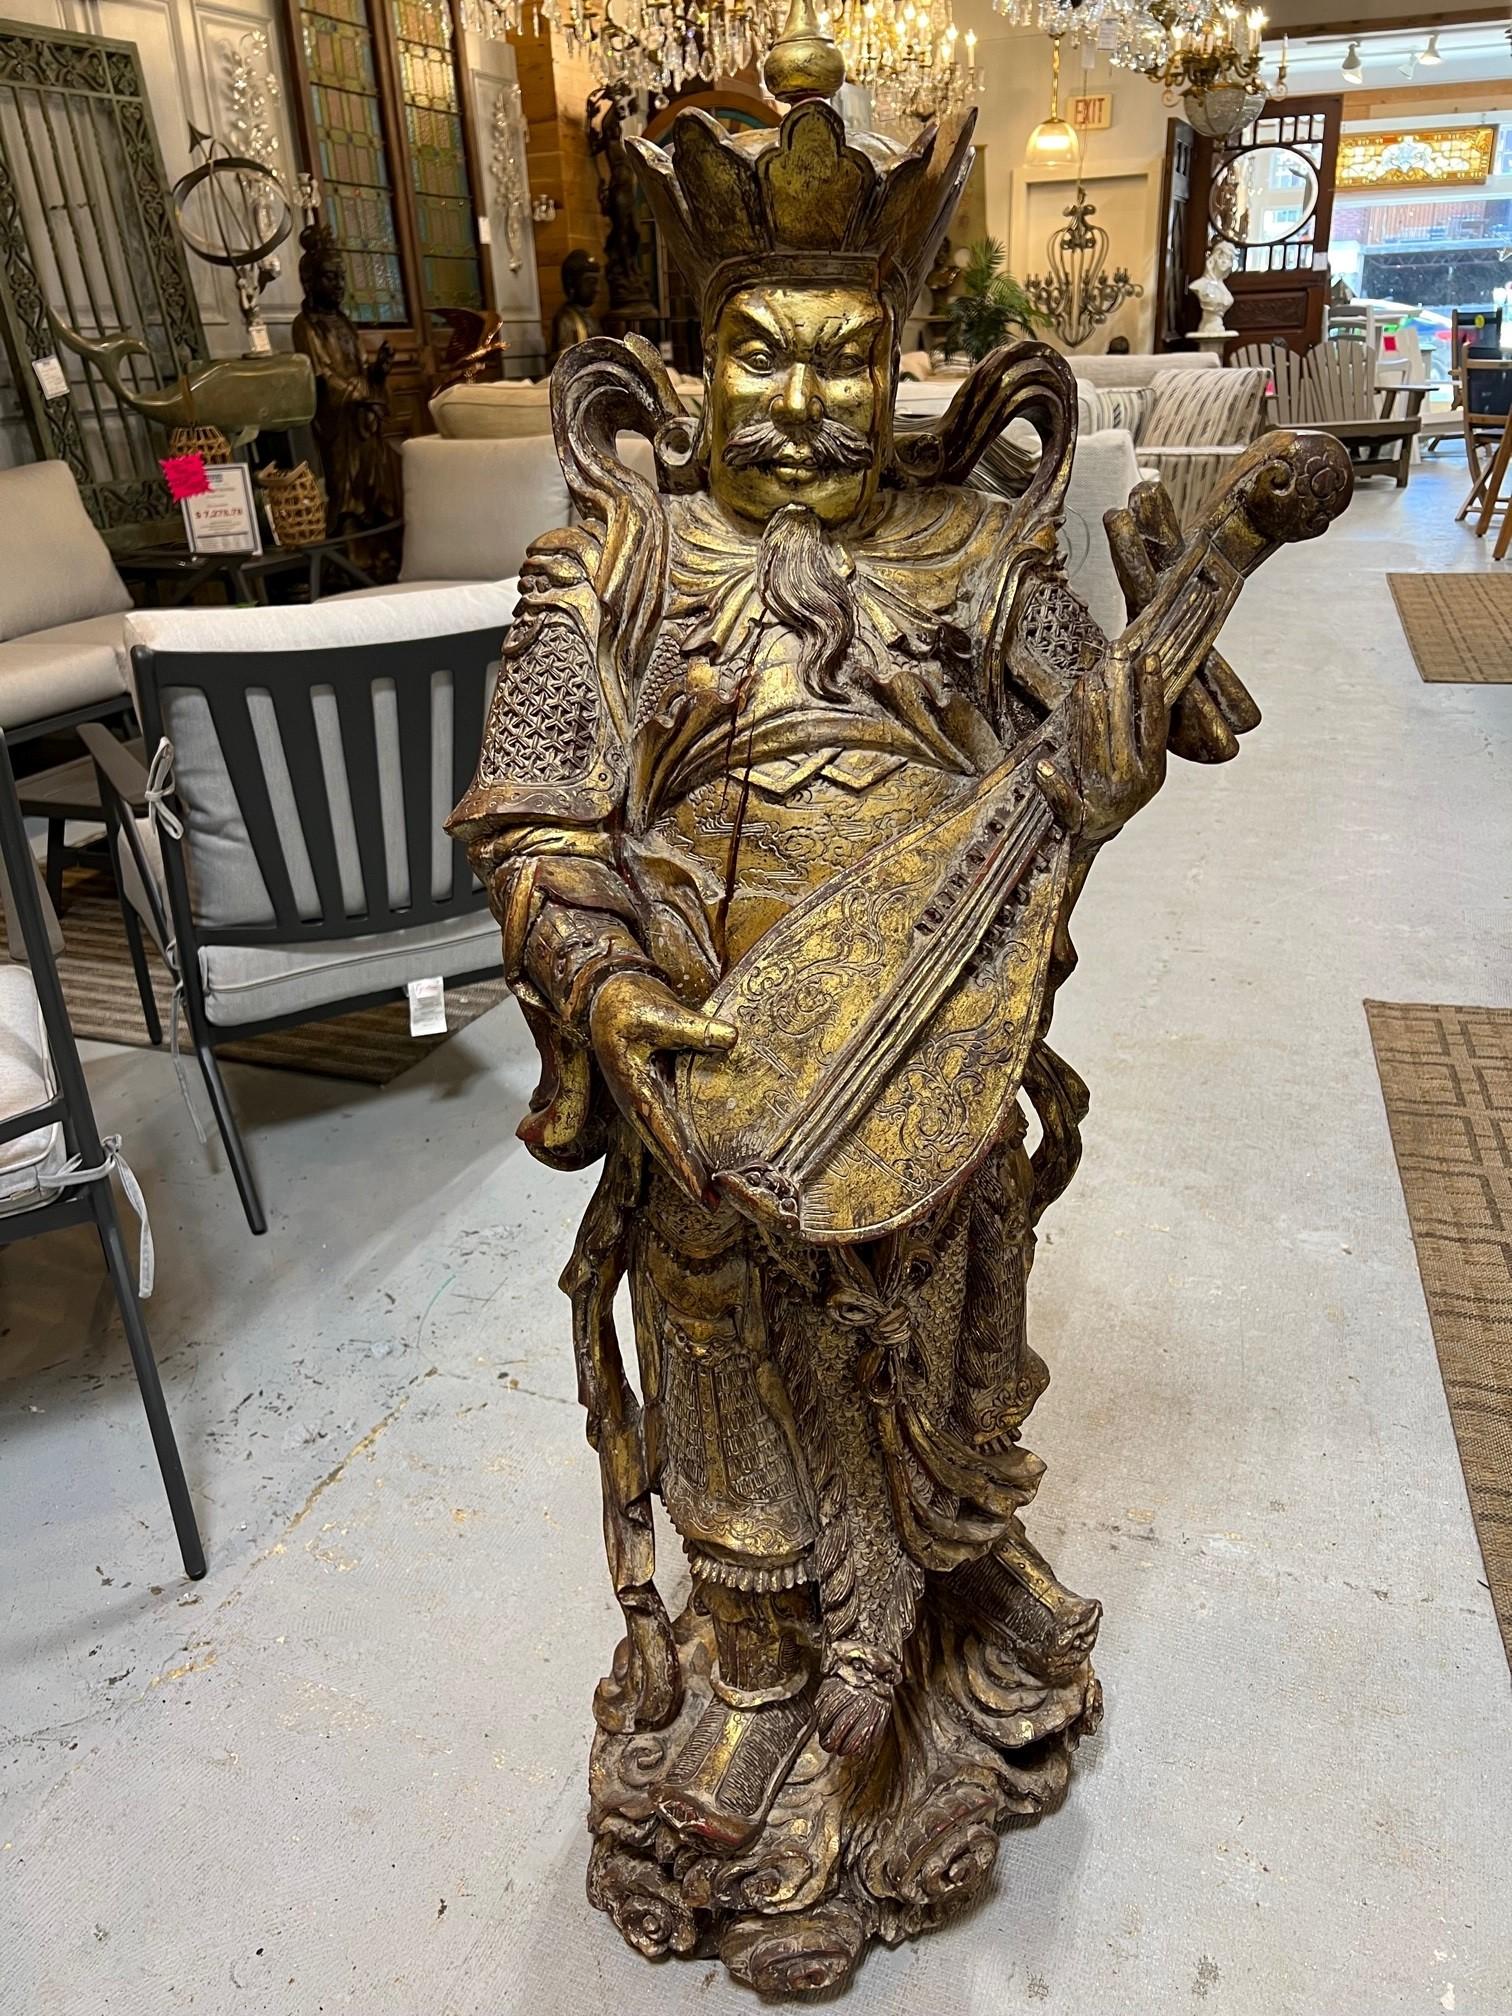 Early 20th century carved wood Tibetan Warrior God playing a Liuqin or a Chinese mandolin. I believe this is Dhritarashtra who is a major deity in Buddhism and one of the Four Heavenly Kings. His name means 